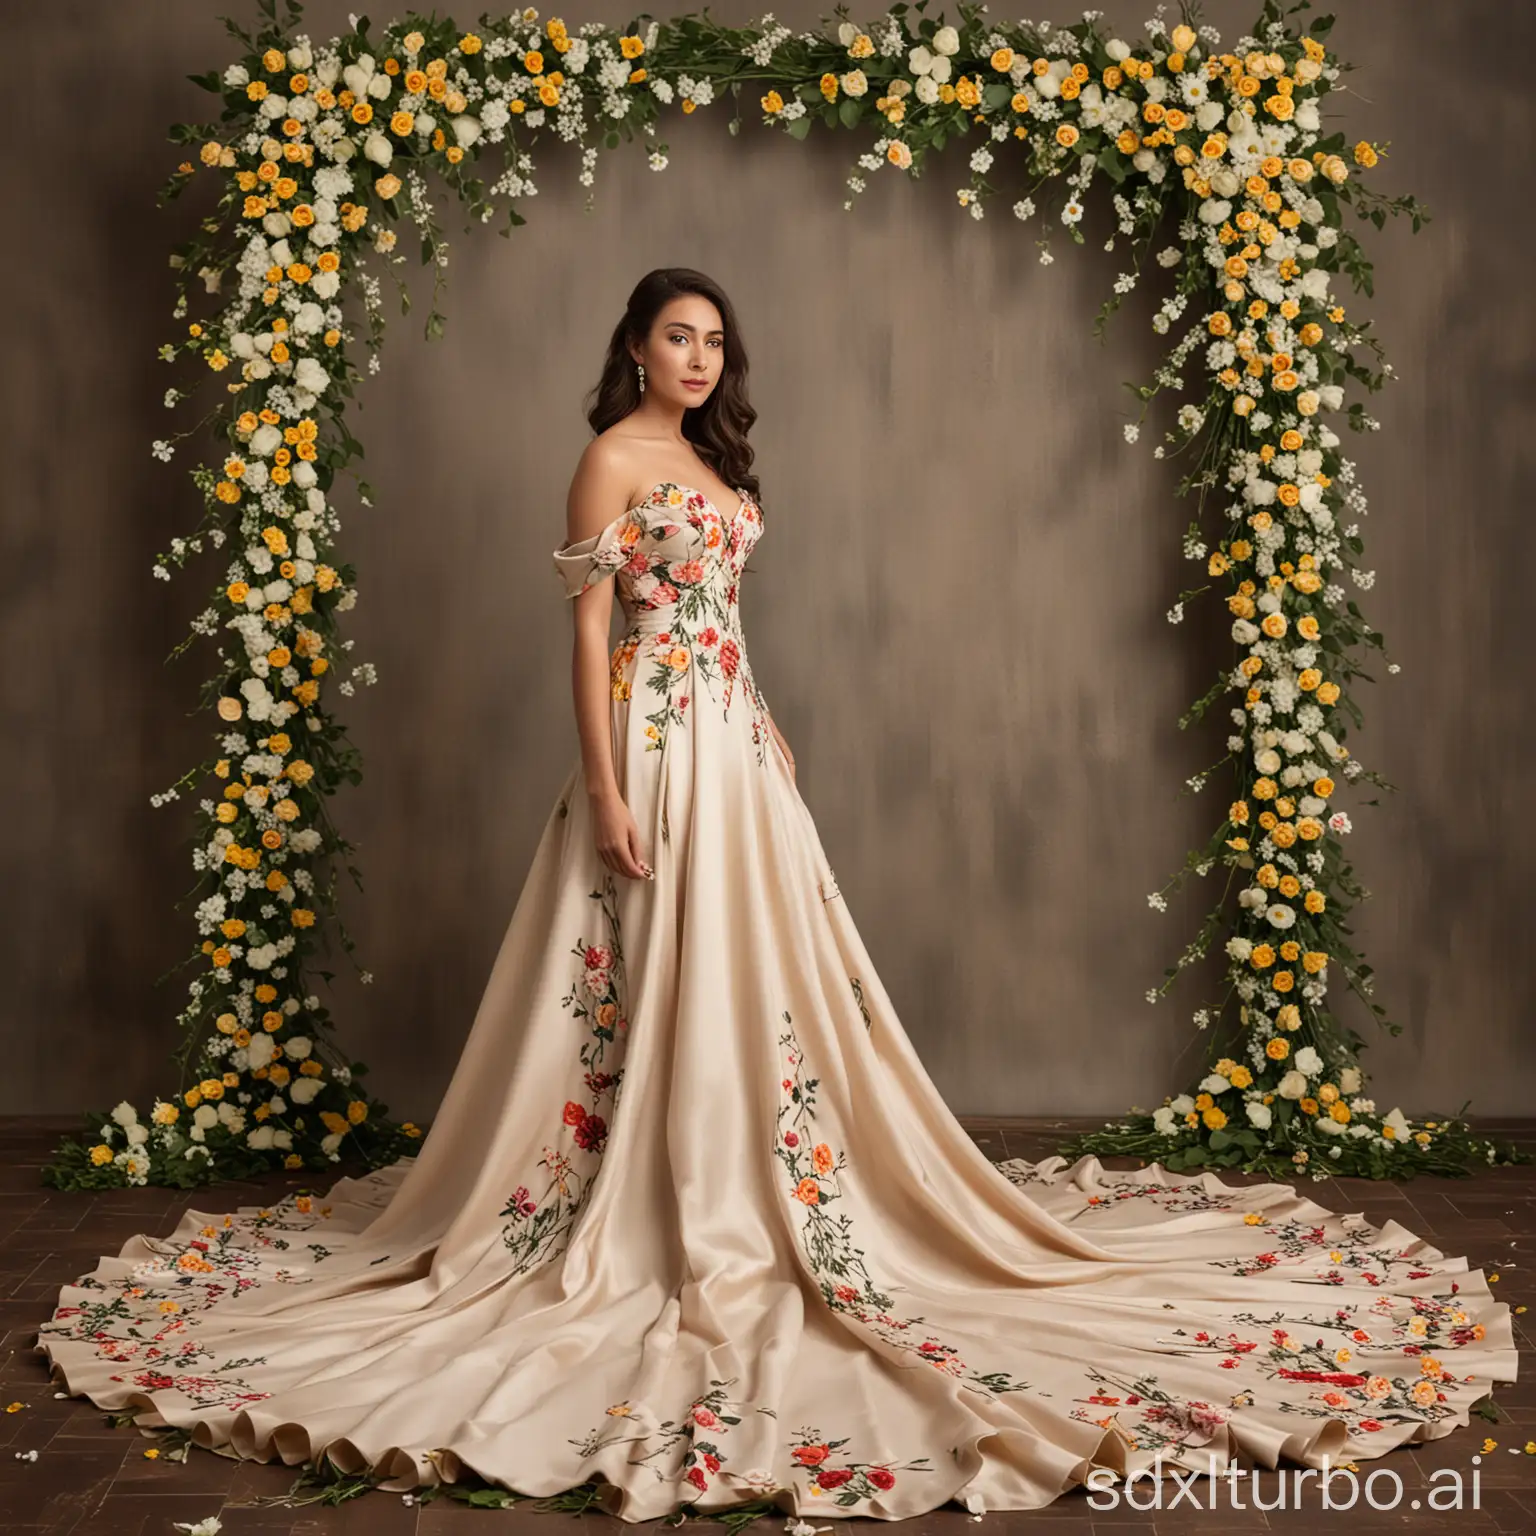 pikaso texttoimage lady wearing long tale gown made with flowers eleg studio backdrop